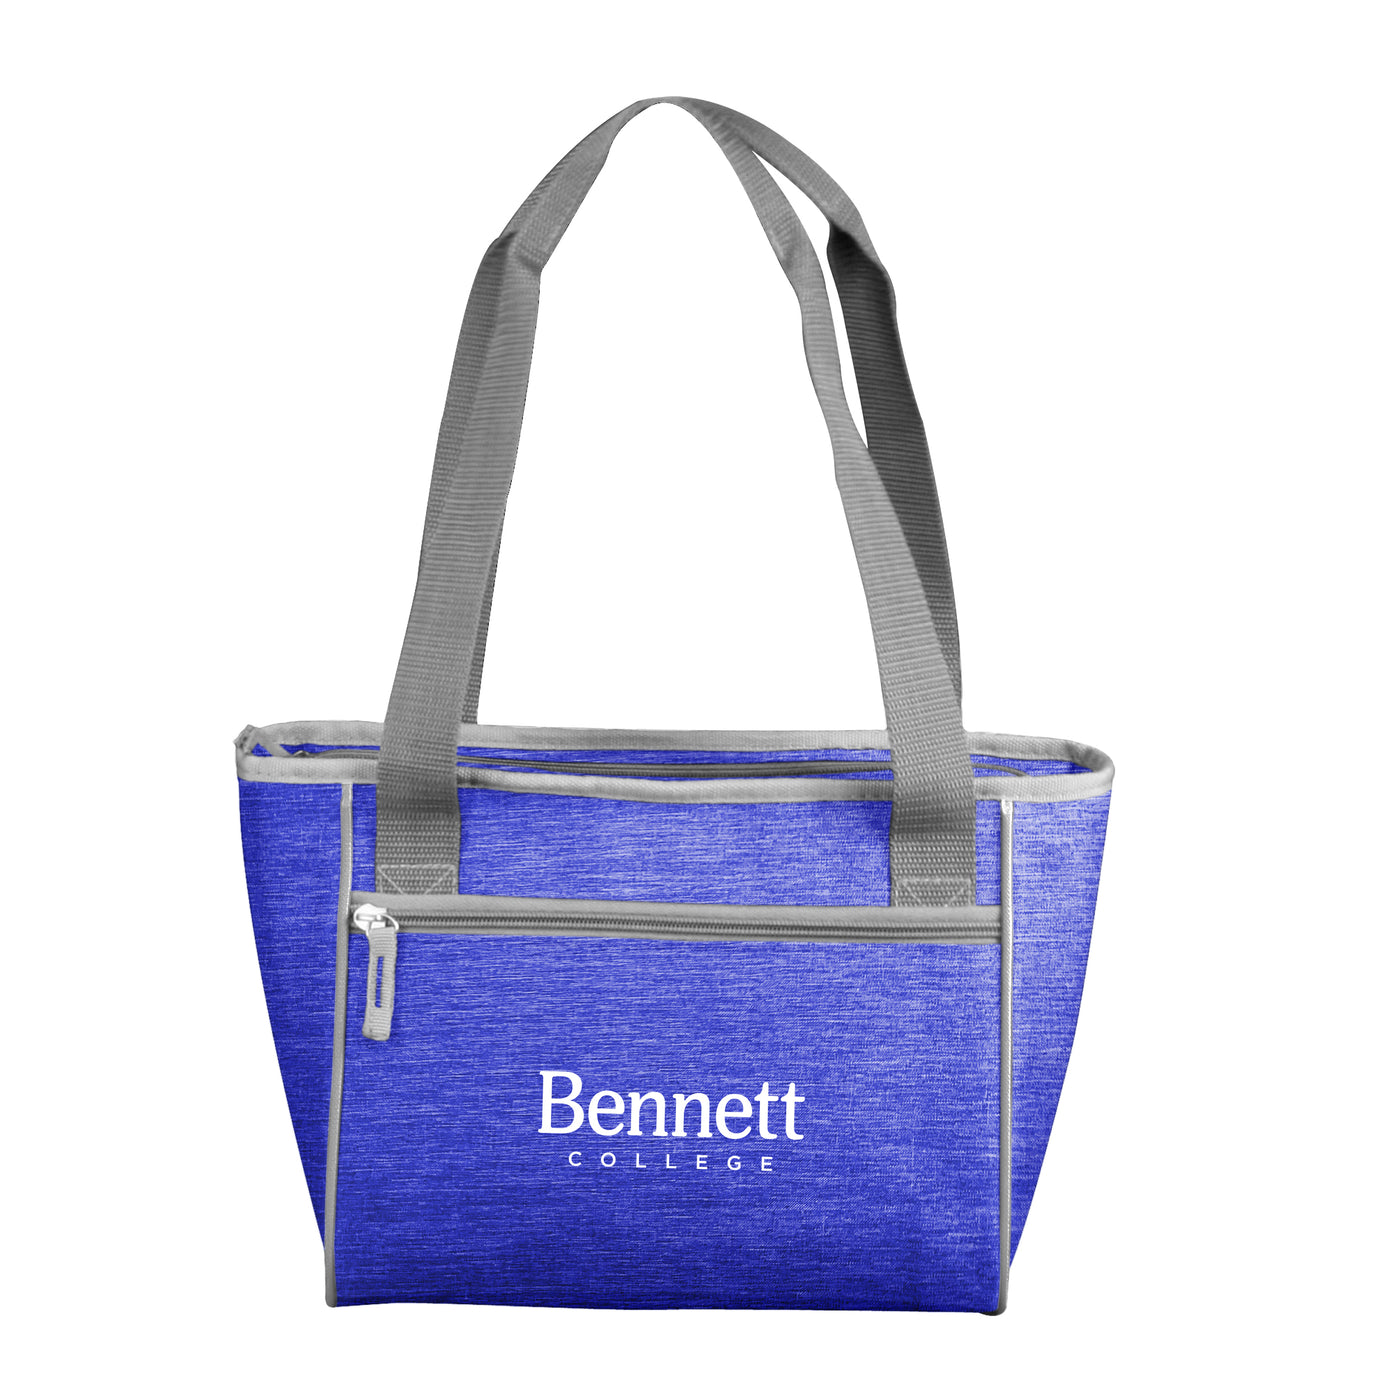 Bennett College 16 Can Cooler Tote